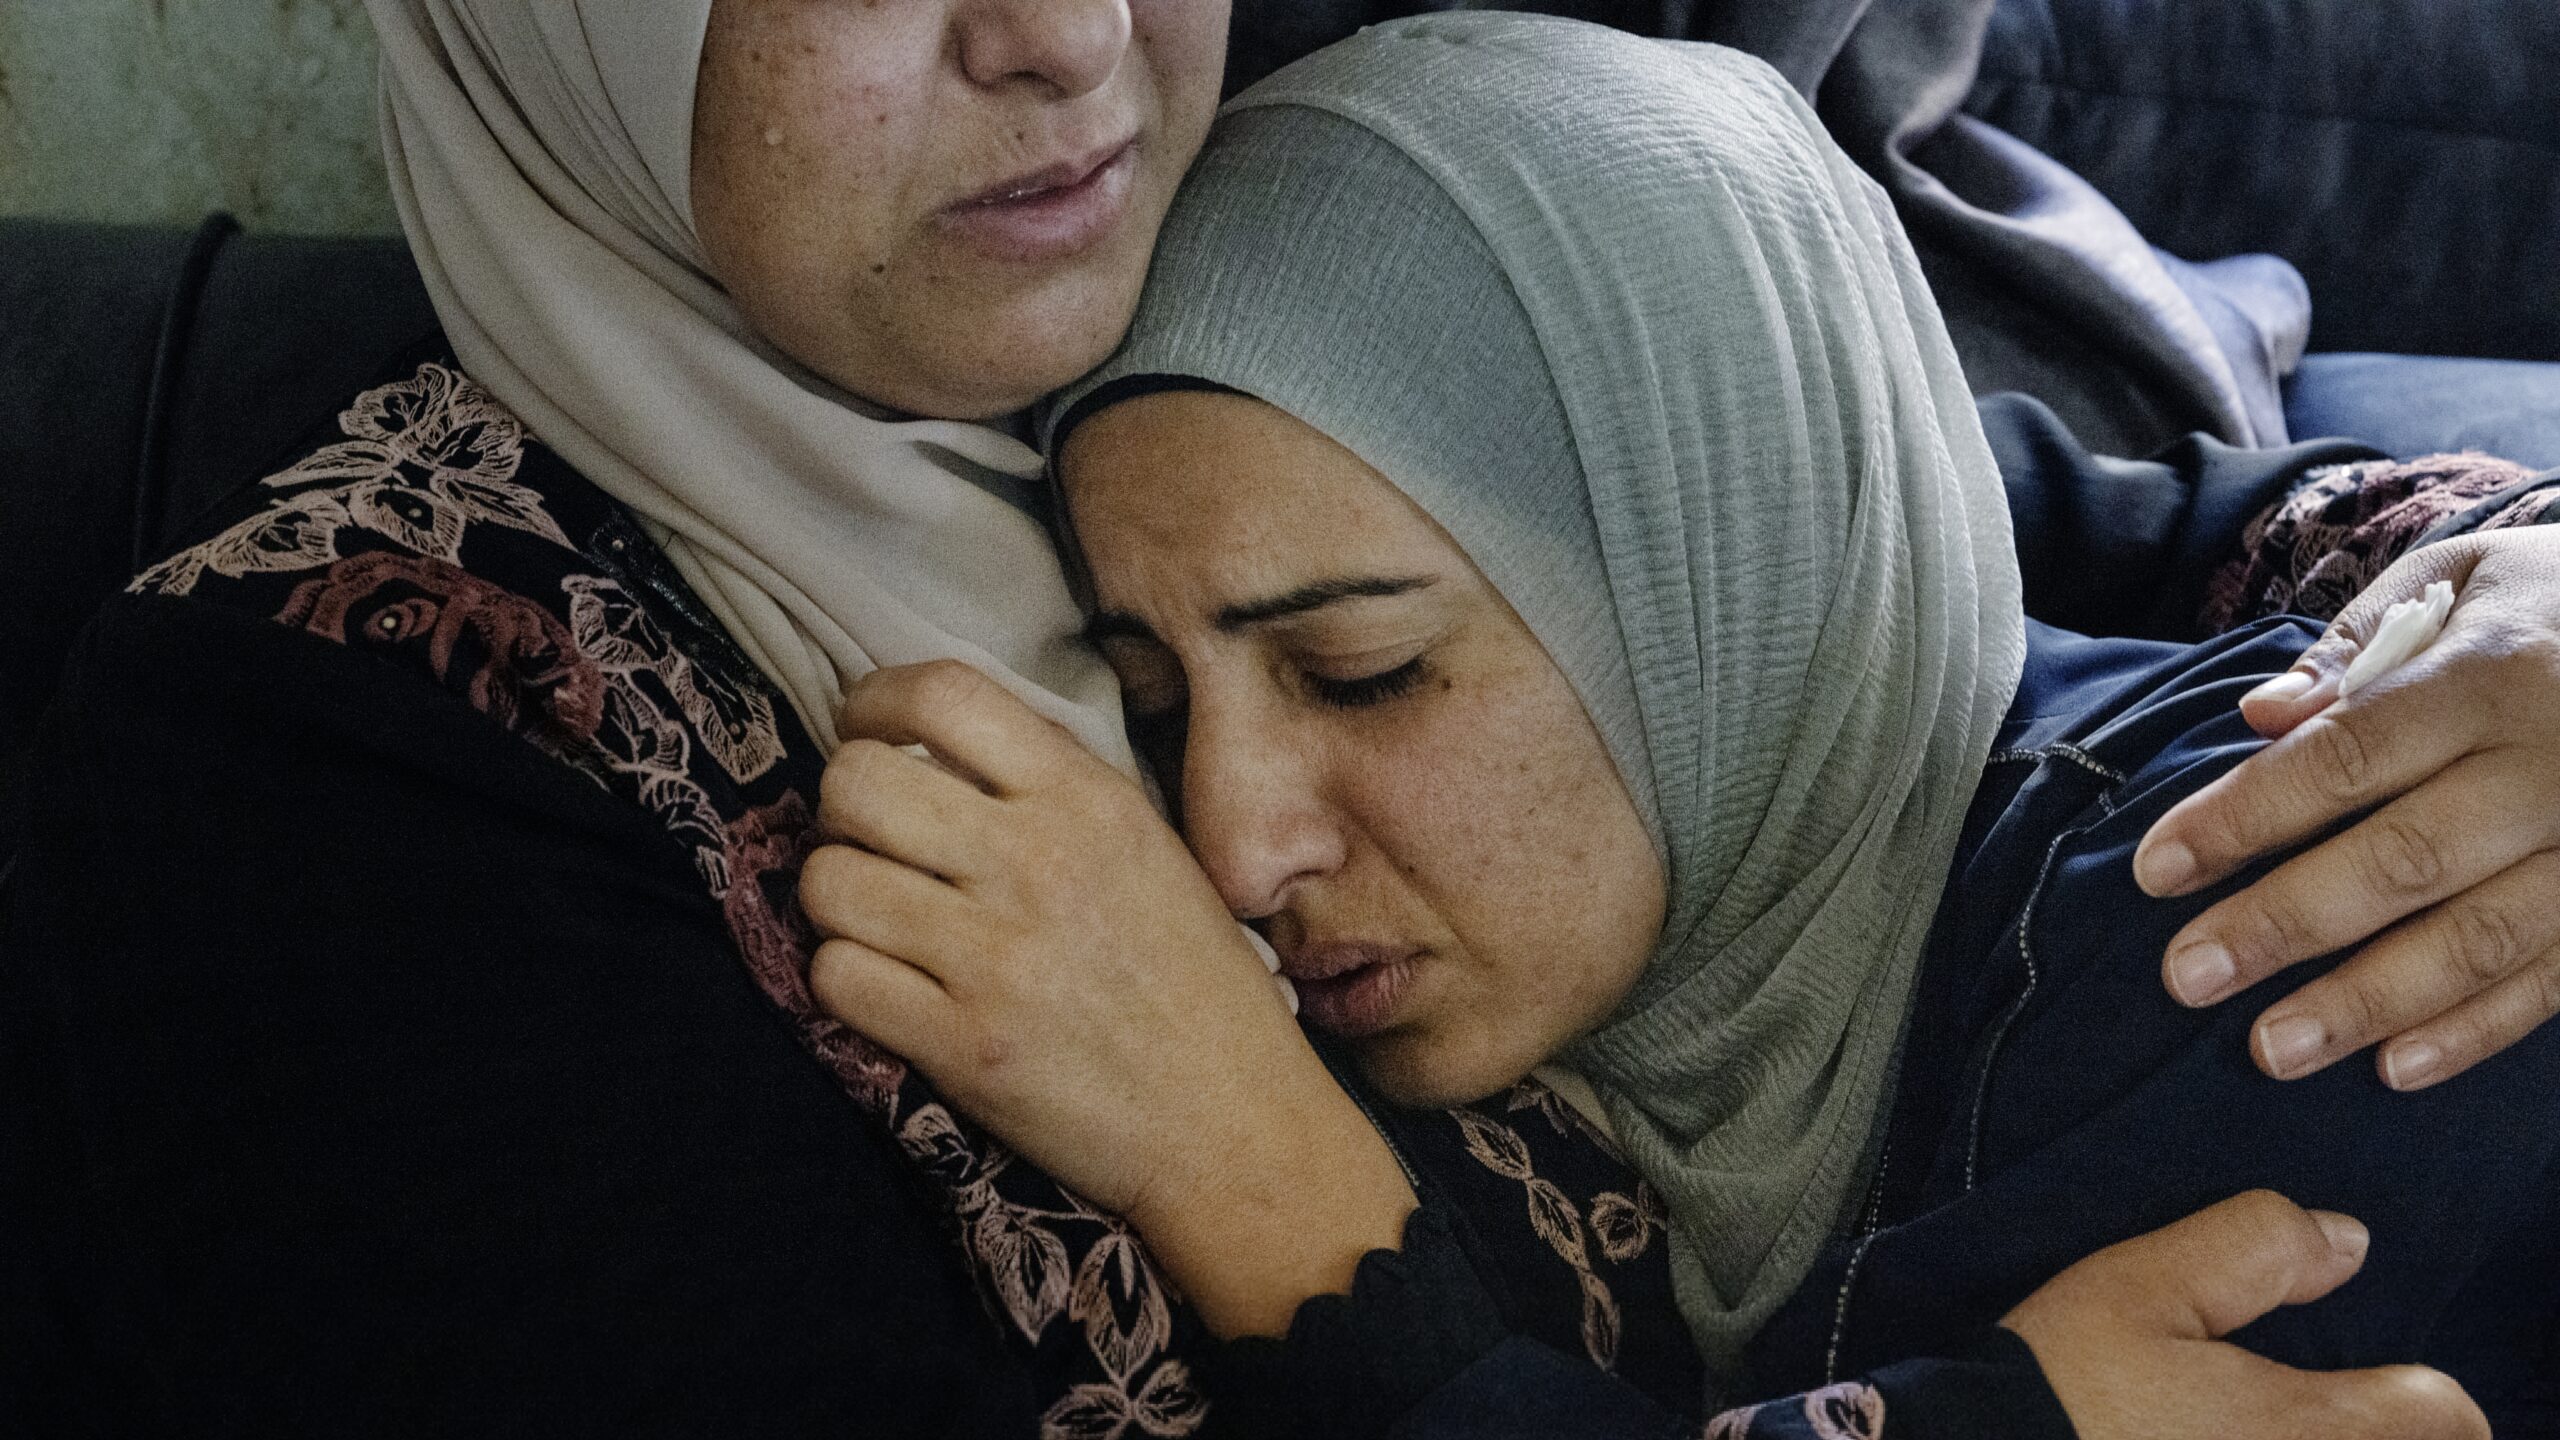 QUSRA, WEST BANK — Sisters, wives, mothers, and cousins of the village of Qusra gather to mourn their Palestinian loved